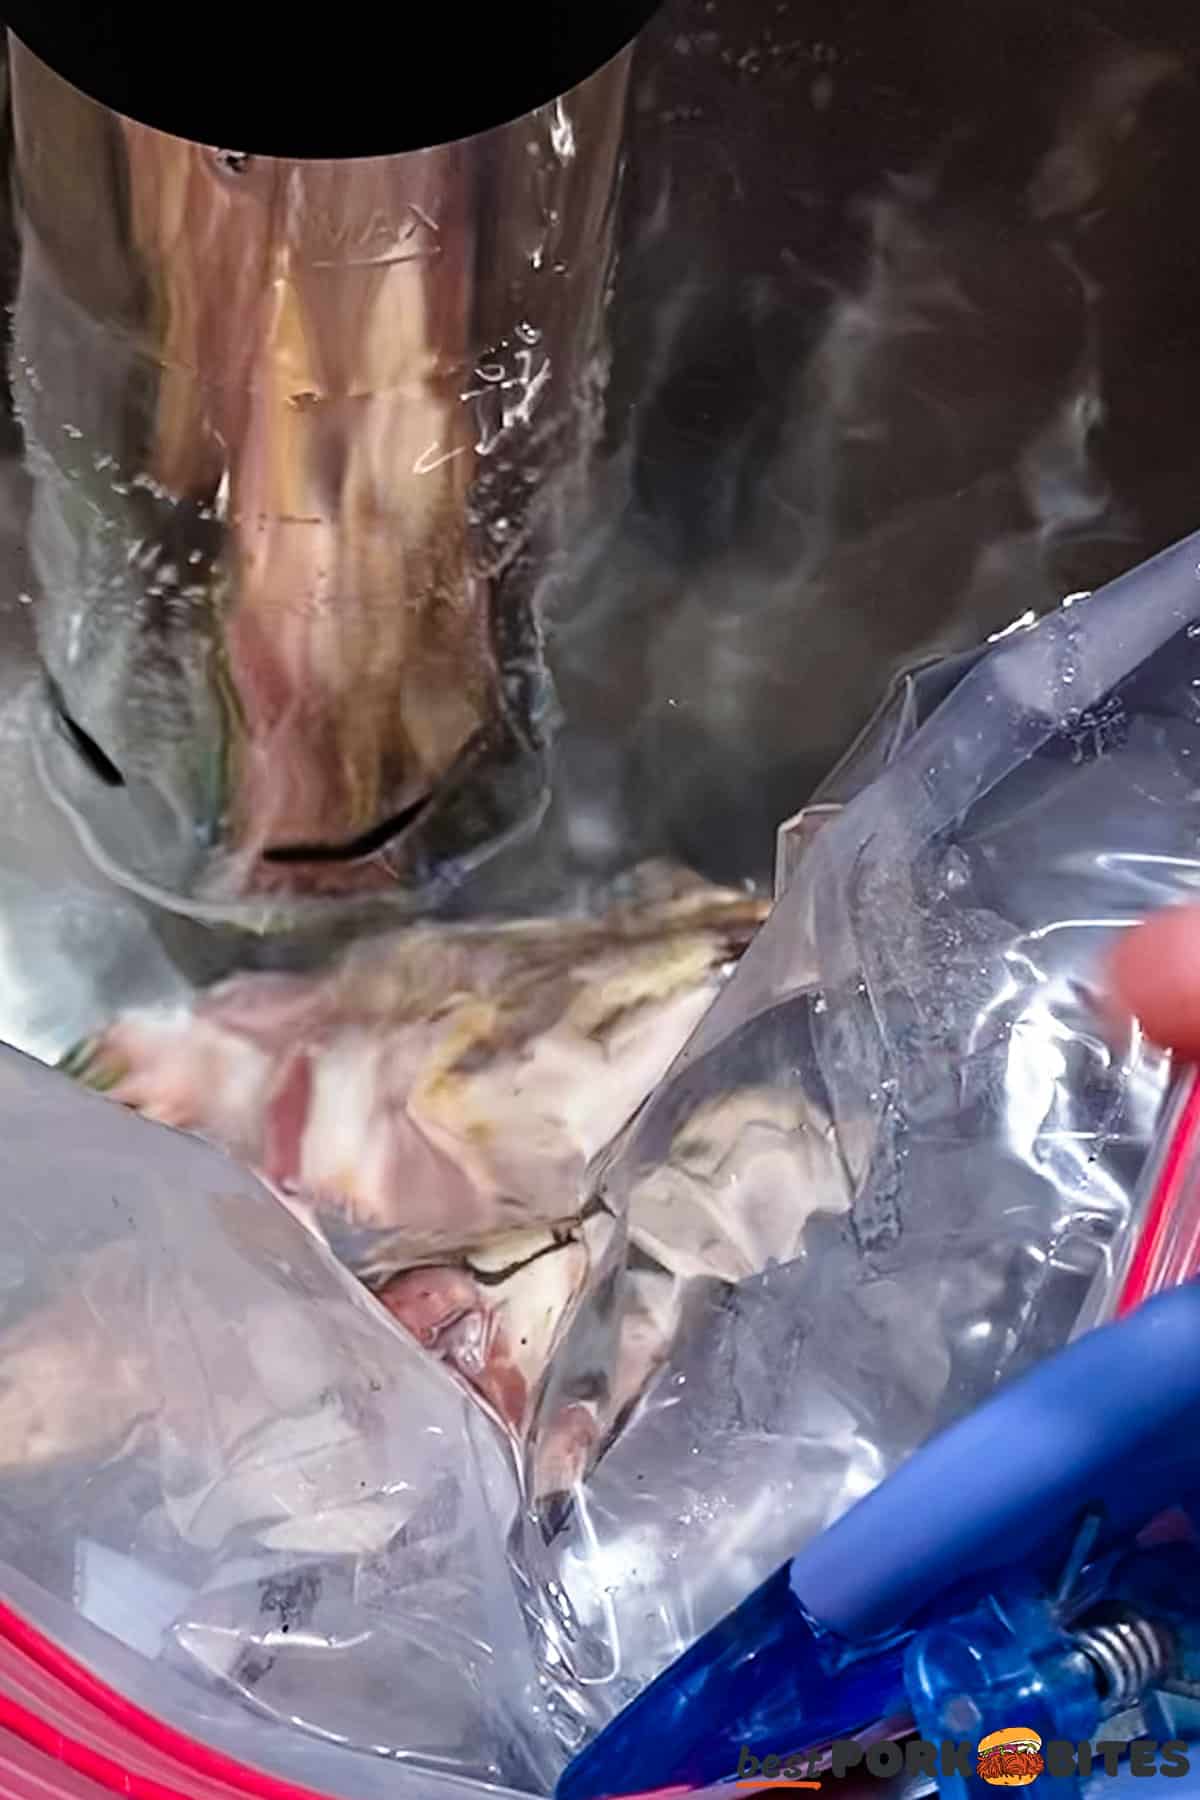 pork chops in a sealed bag being clipped to the side of a bowl with a sous vide machine